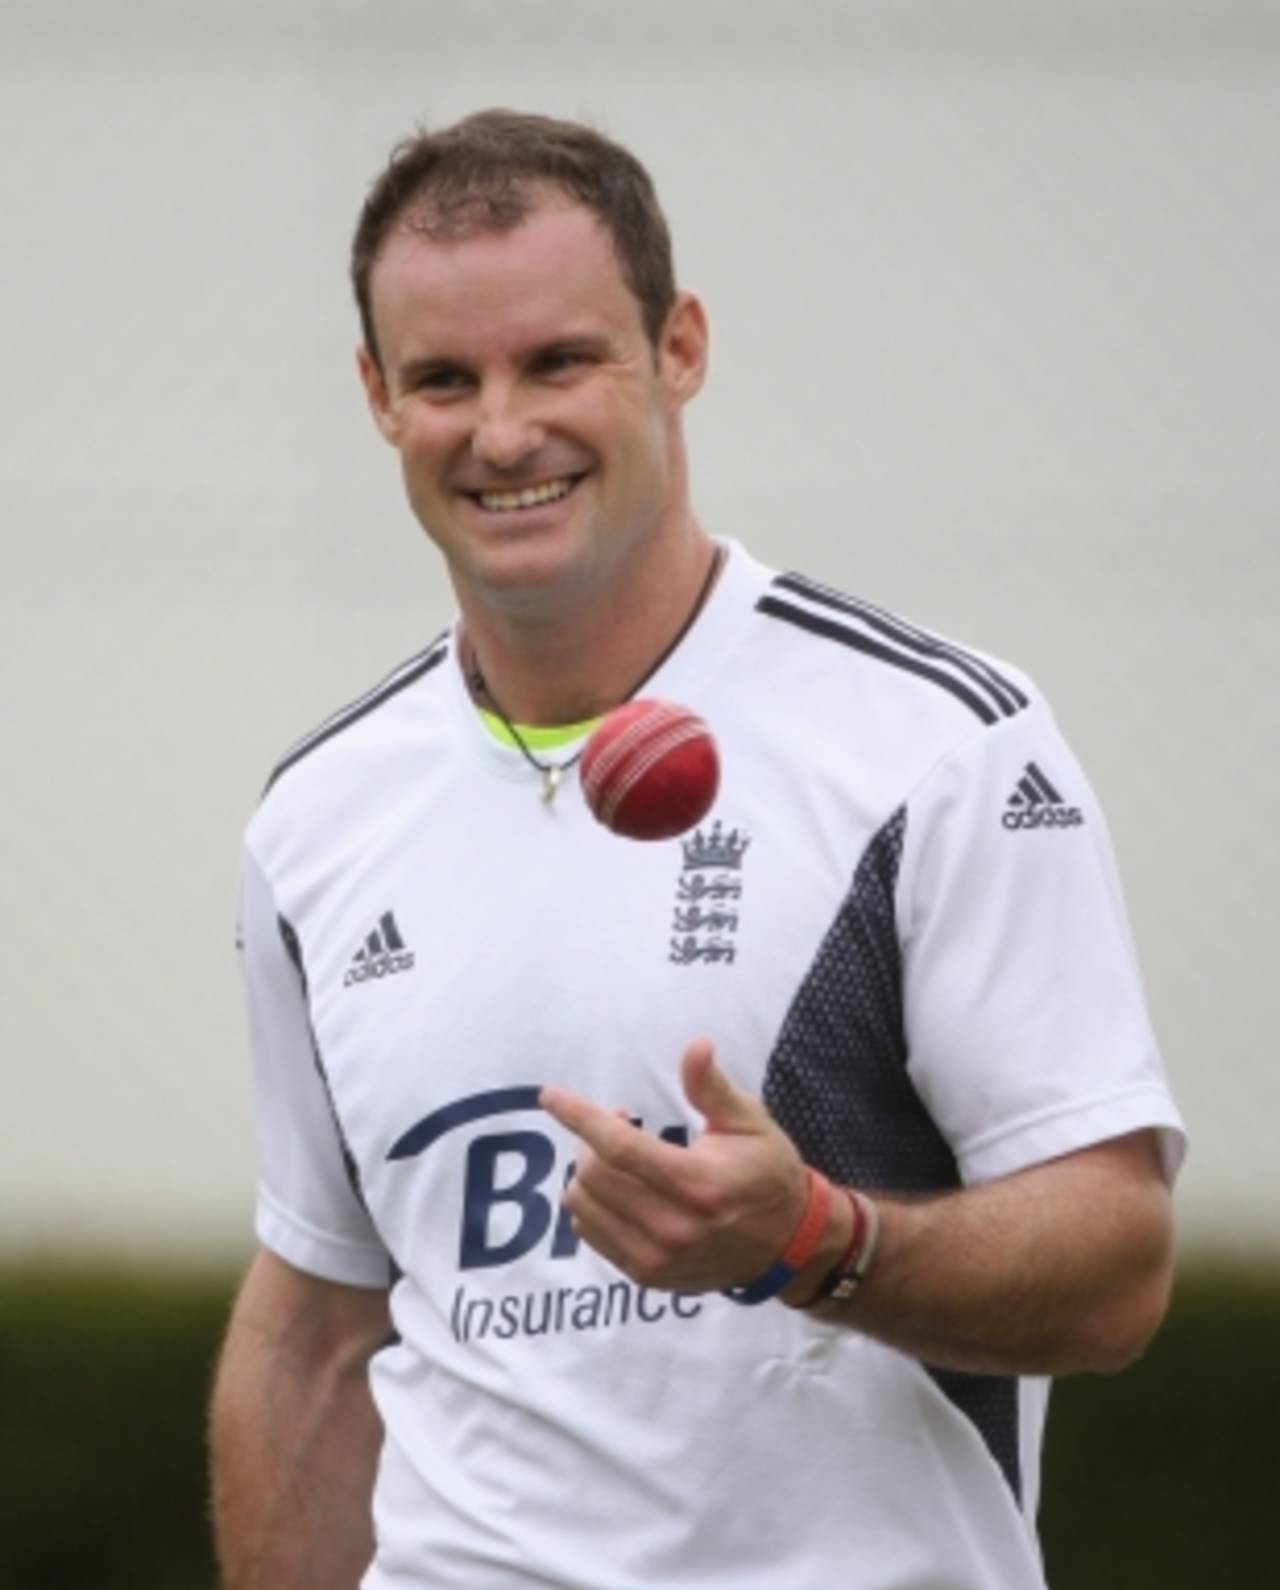 A relaxed Andrew Strauss practices ahead of England's first warm-up game, Perth, November 4, 2010